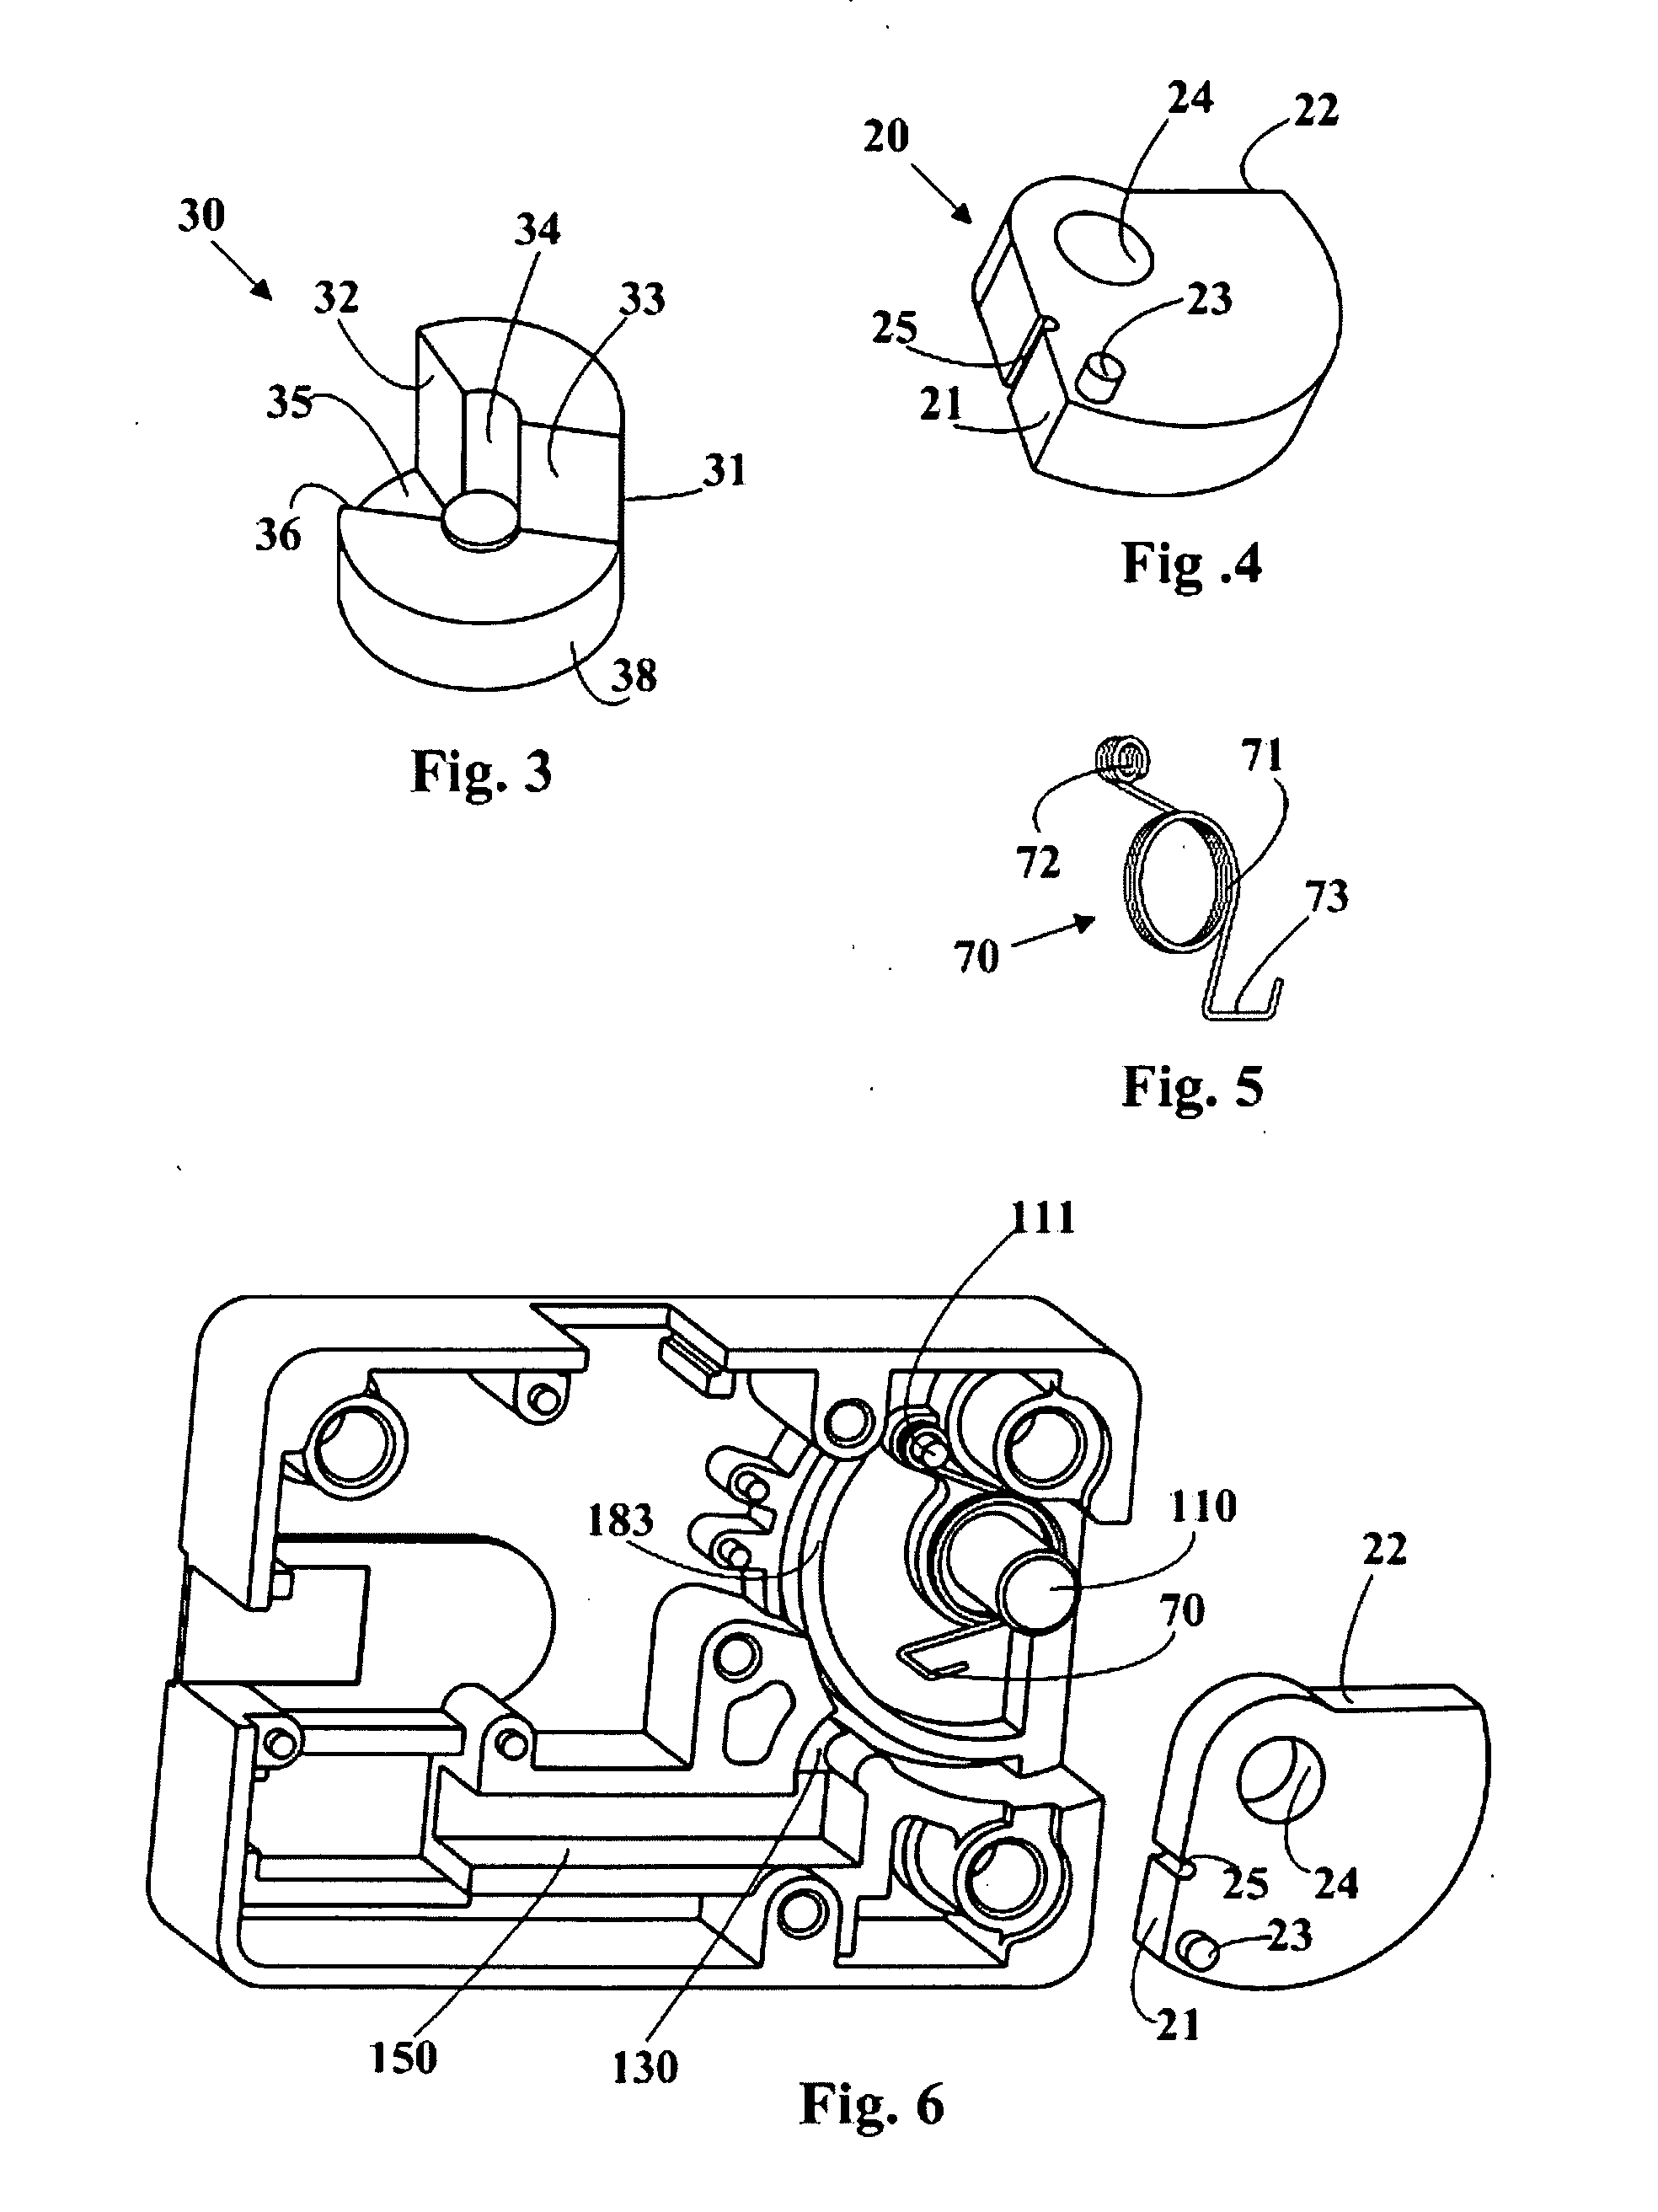 Lock with a swing bolt and an actuator assembly thereof